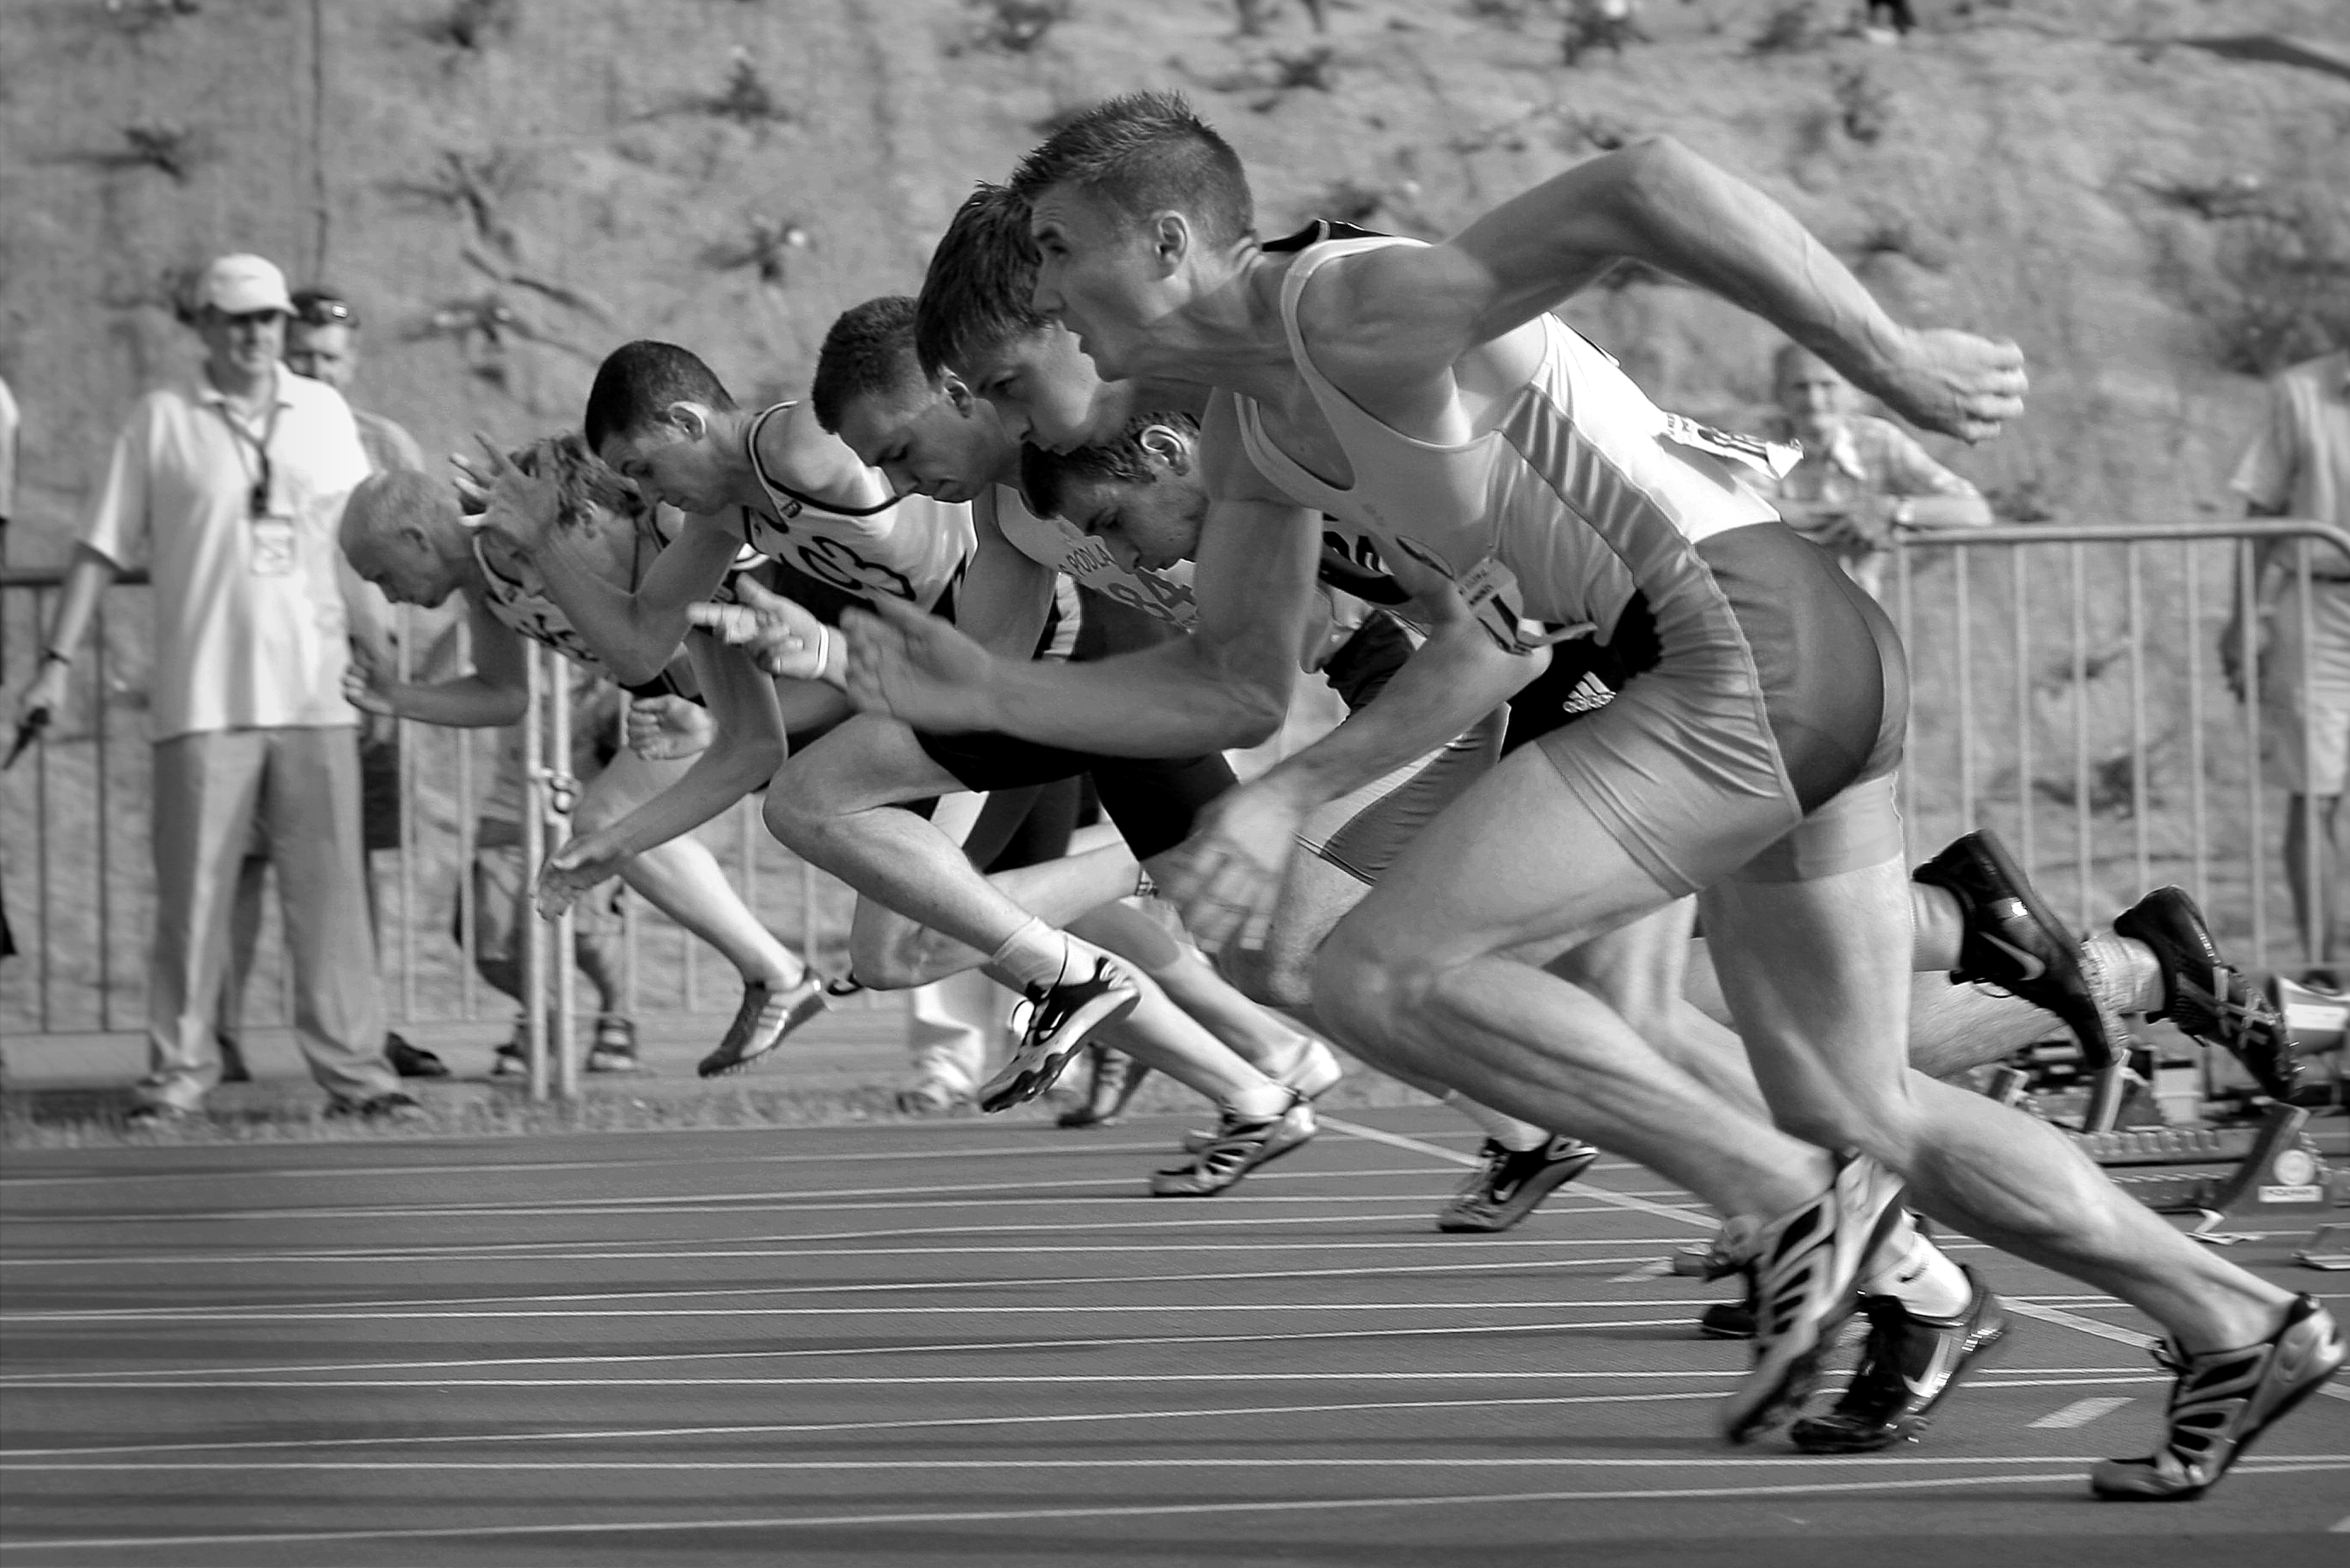 Sprinters on a track - Use Sprint Planning to Define a Month's Business Goals